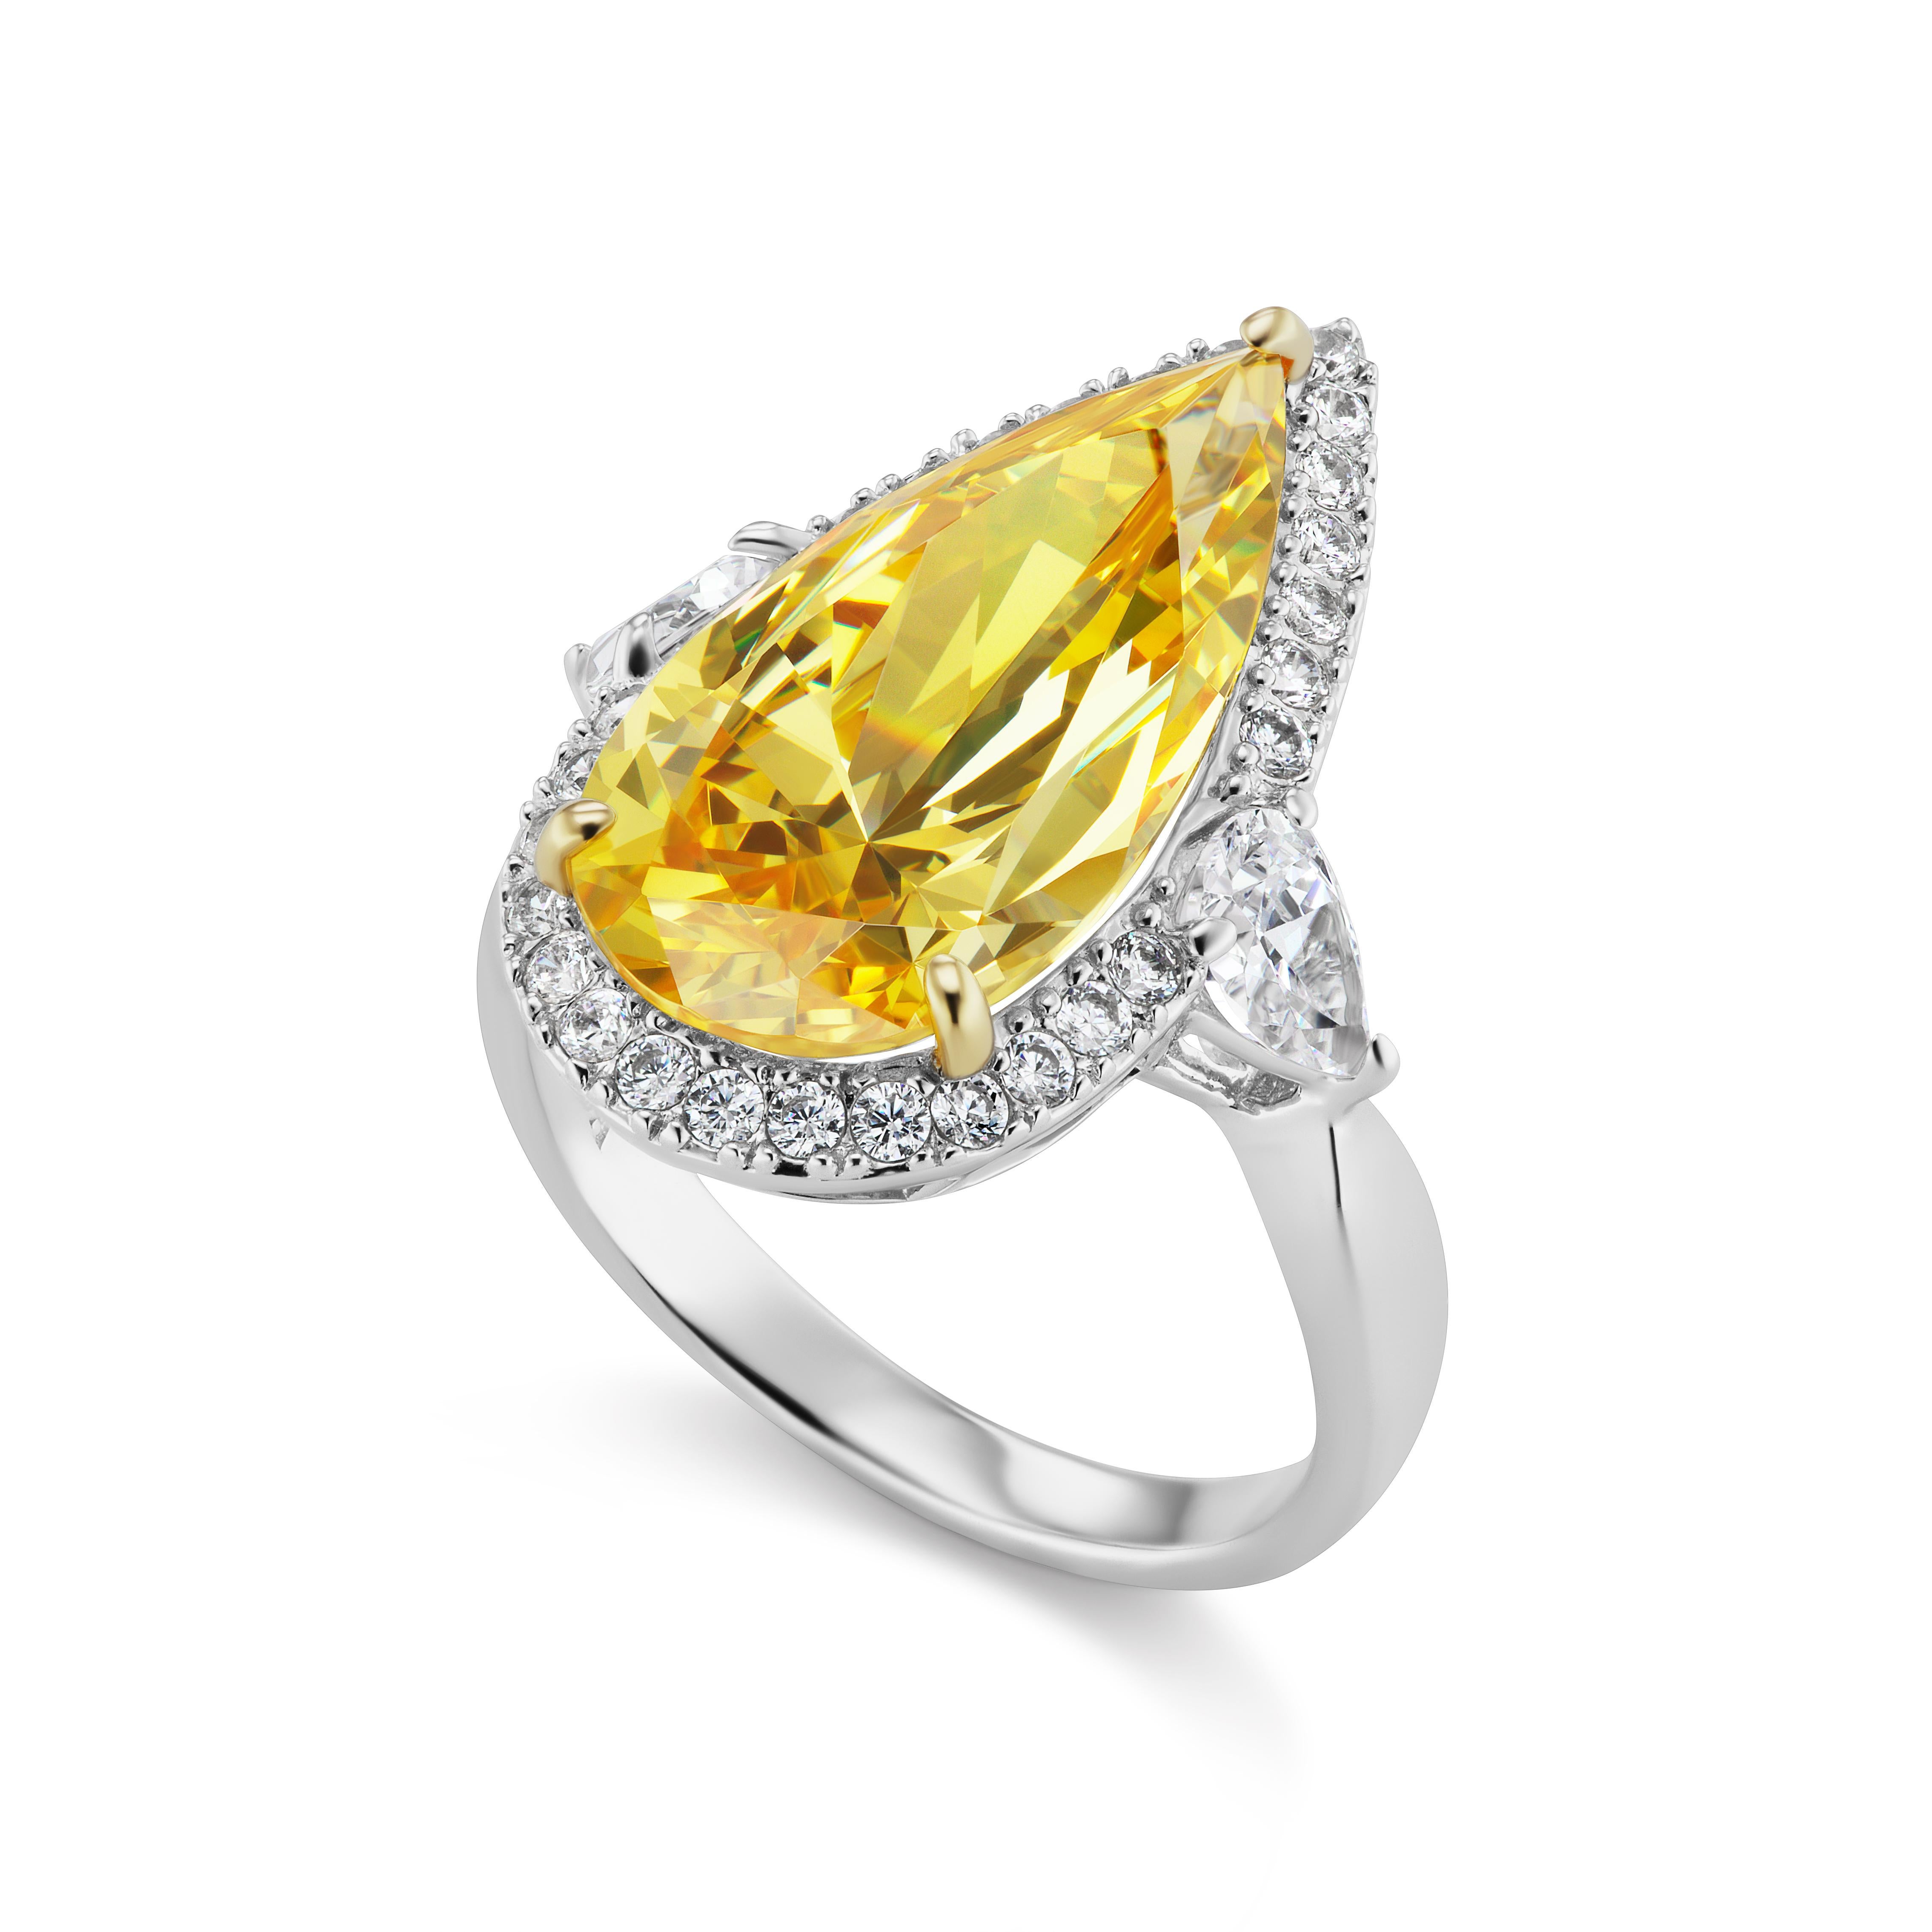 Magnificent  Costume Jewelry Pear Shape Cubic Zirconia Bright Sparkly Canary Yellow Diamond Bordered White CZ Diamond Halo Sterling Ring. Measures 1 inch long by 3/4 inch widest.  Free sizing